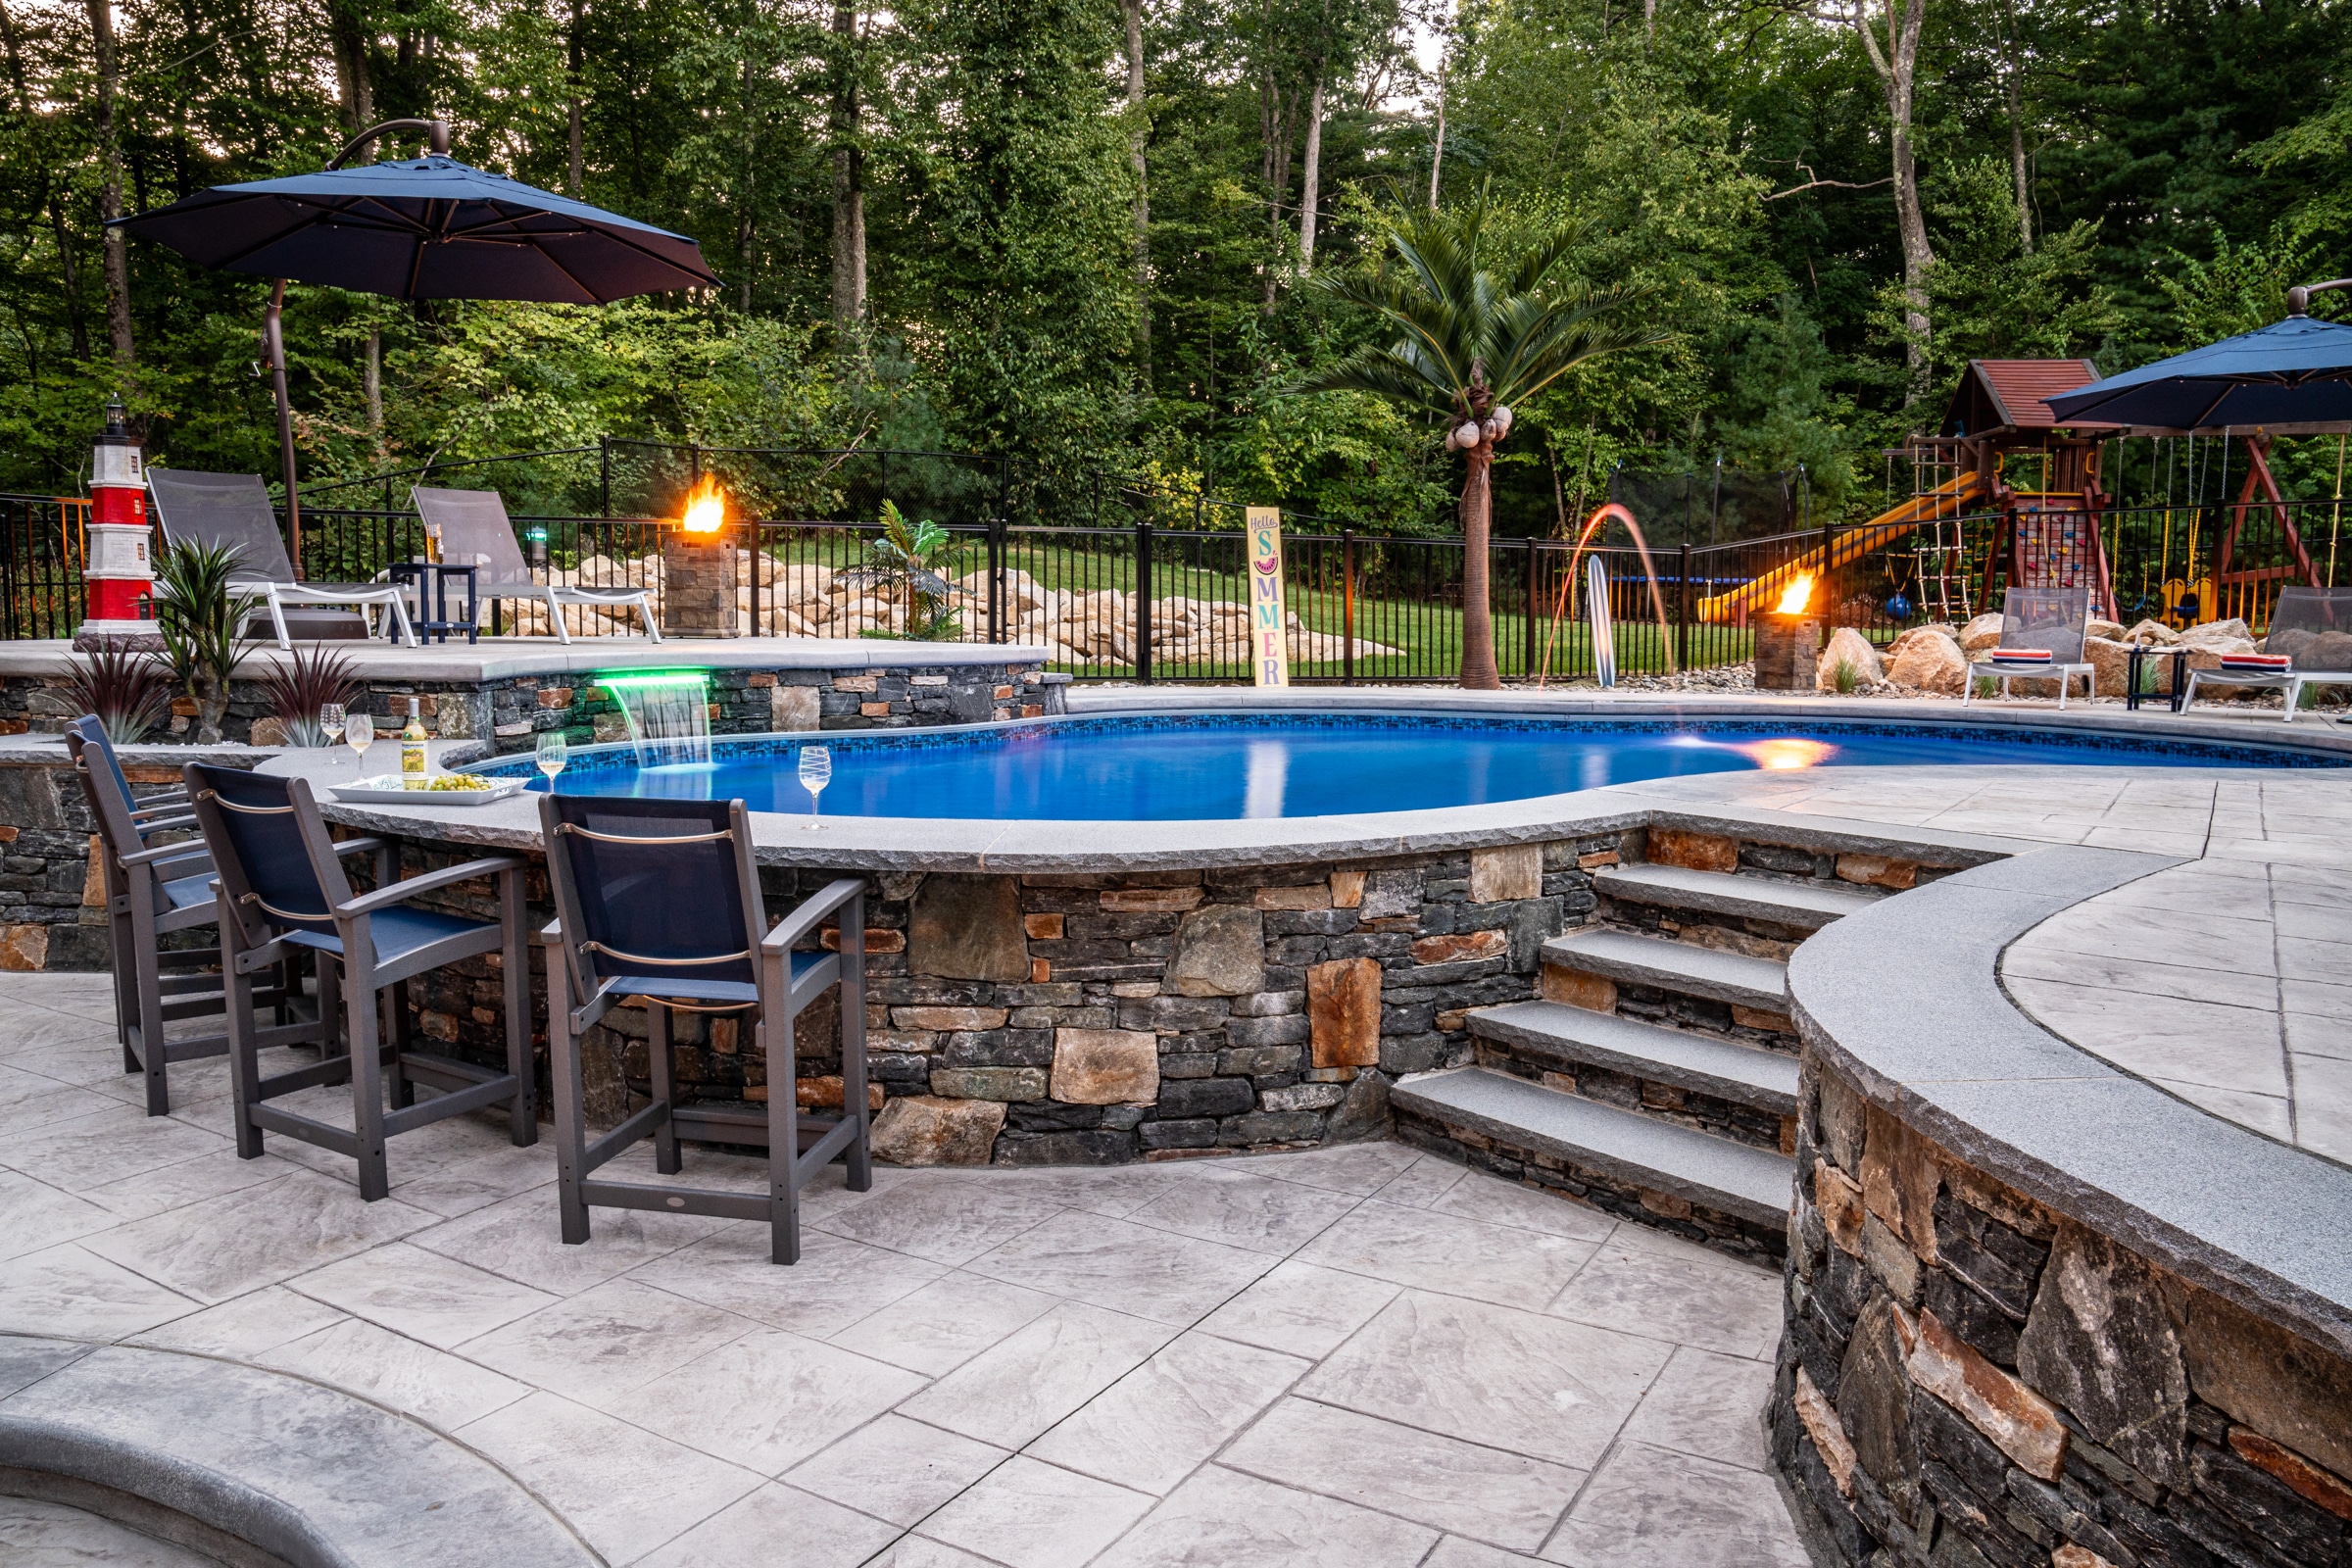 Dex by Terra created an elevated pool deck with a sunken fire pit lounge to accommodate a significant slope in the client's yard.